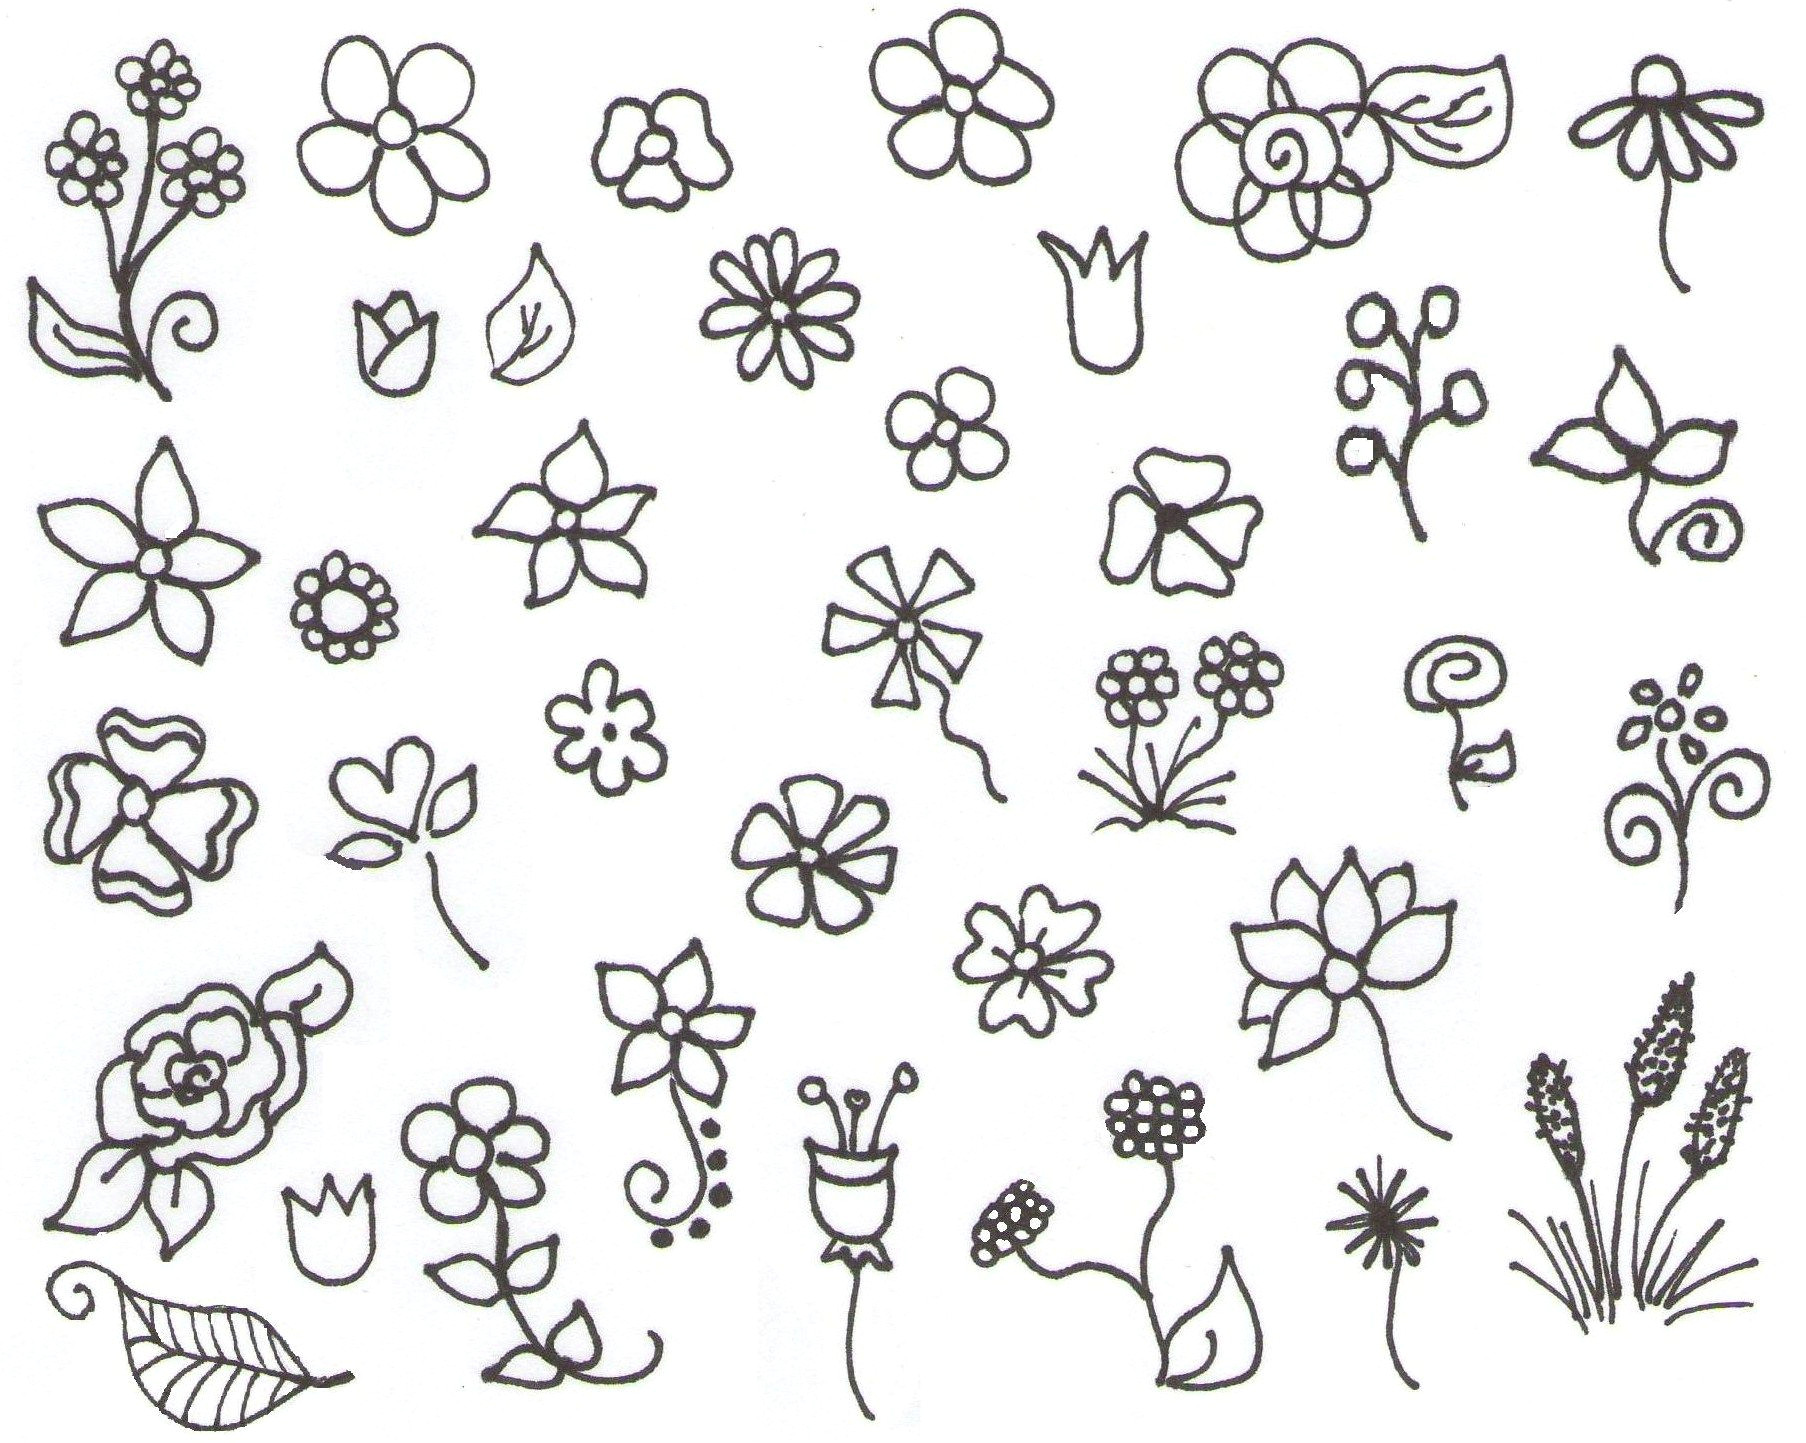 Drawing Flowers Doodling My Inspiration Flower Doodles Drawing Pinterest Flower